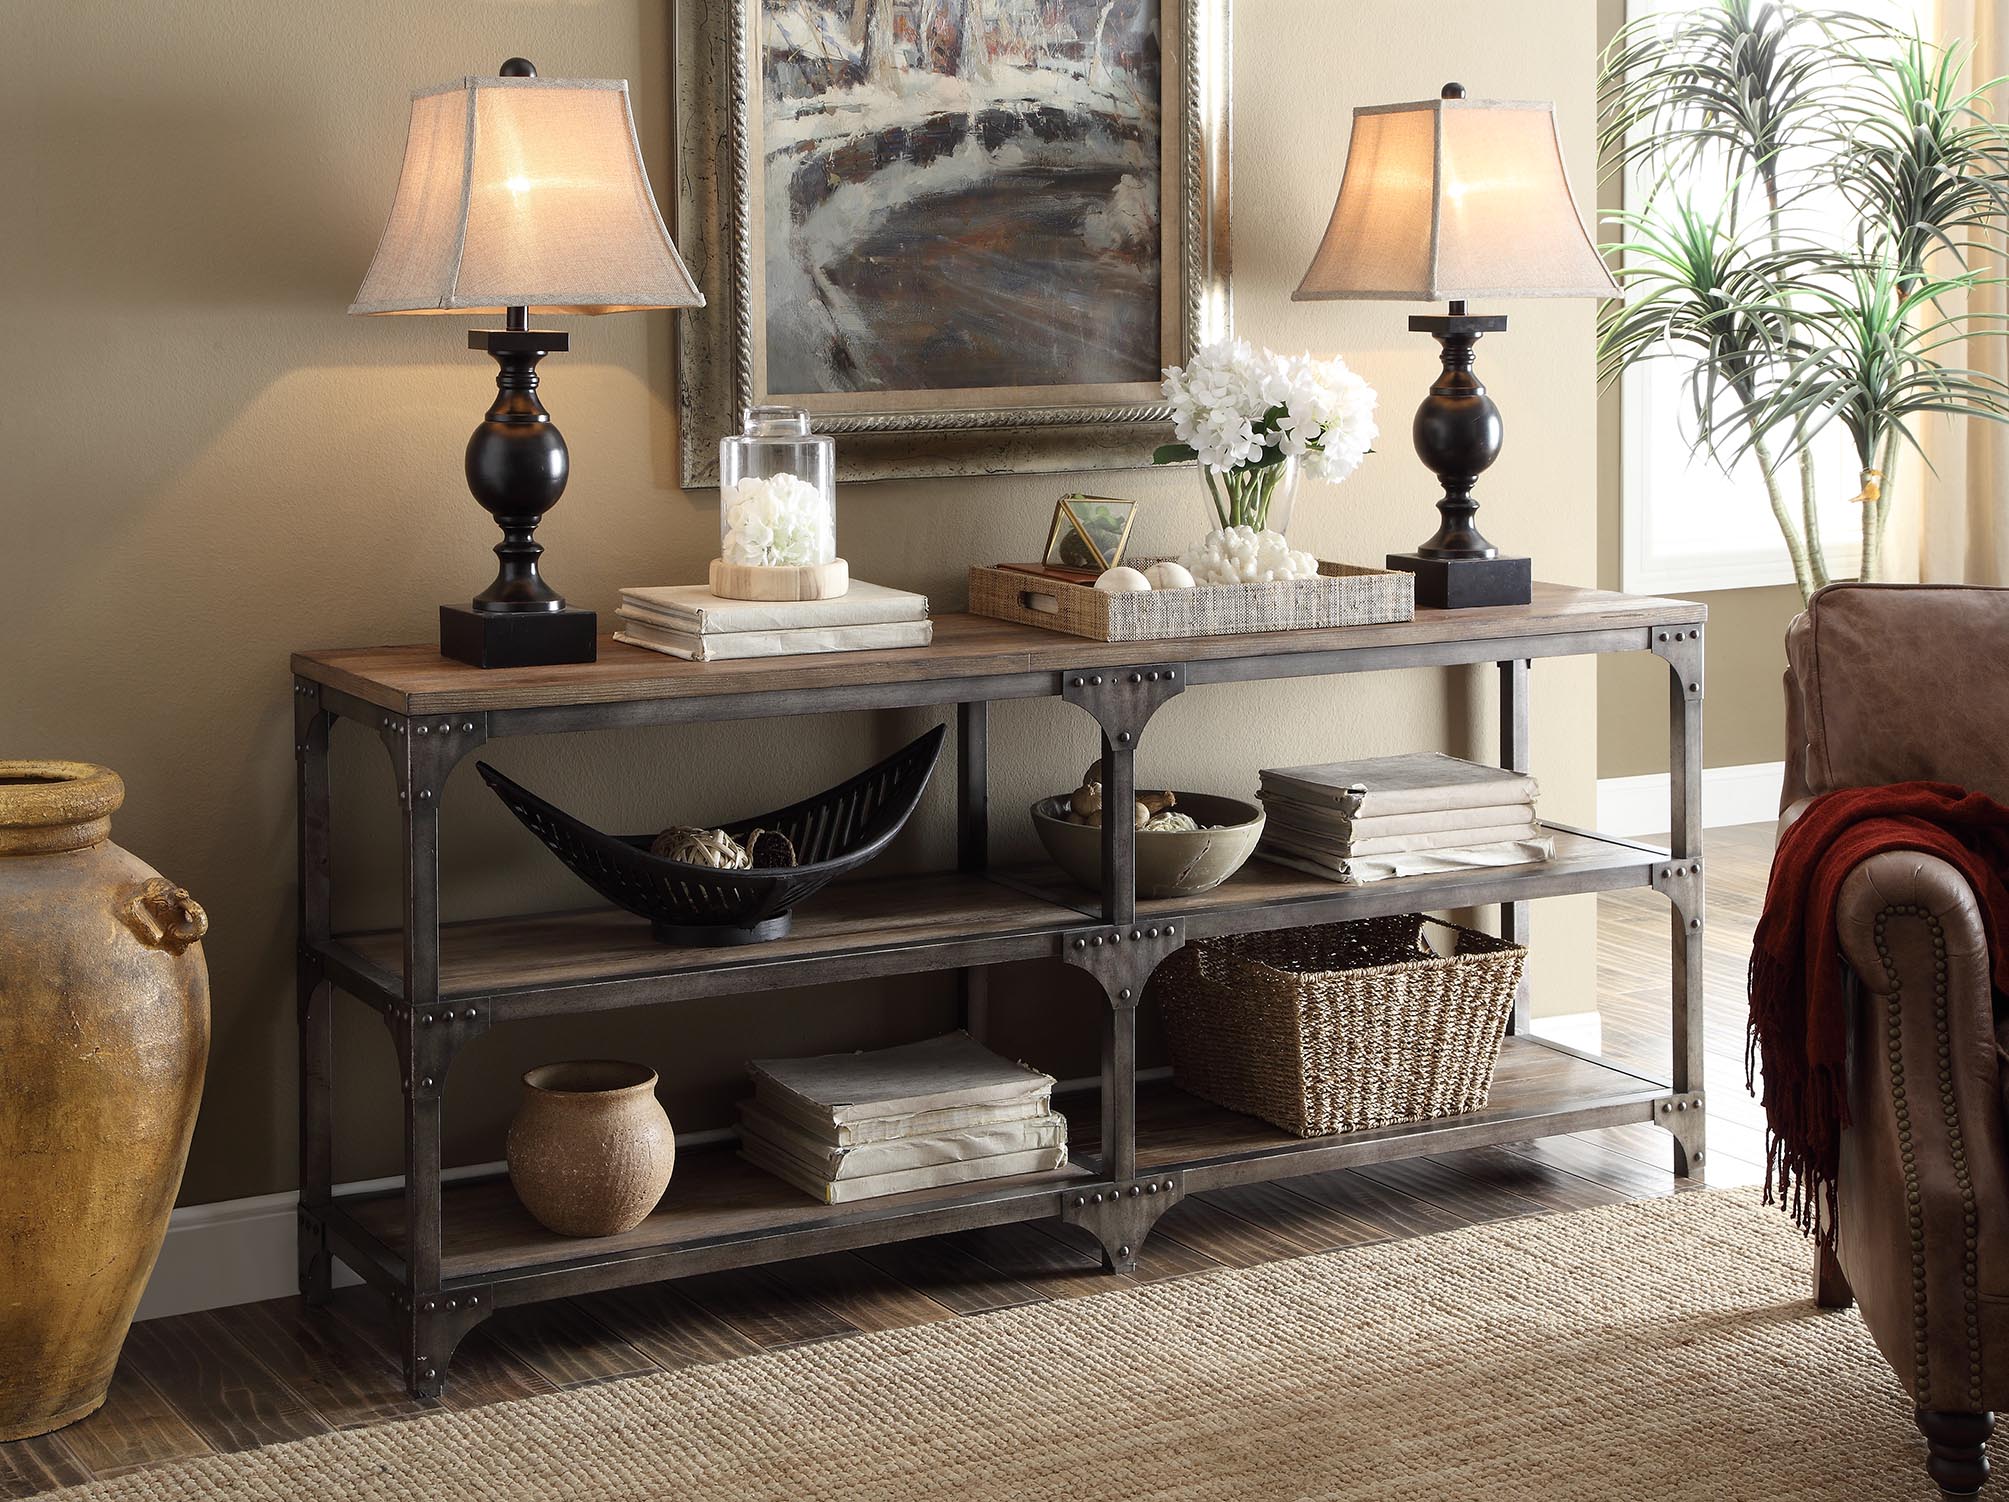 72" X 16" X 30" Weathered Oak And Antique Silver Console Table